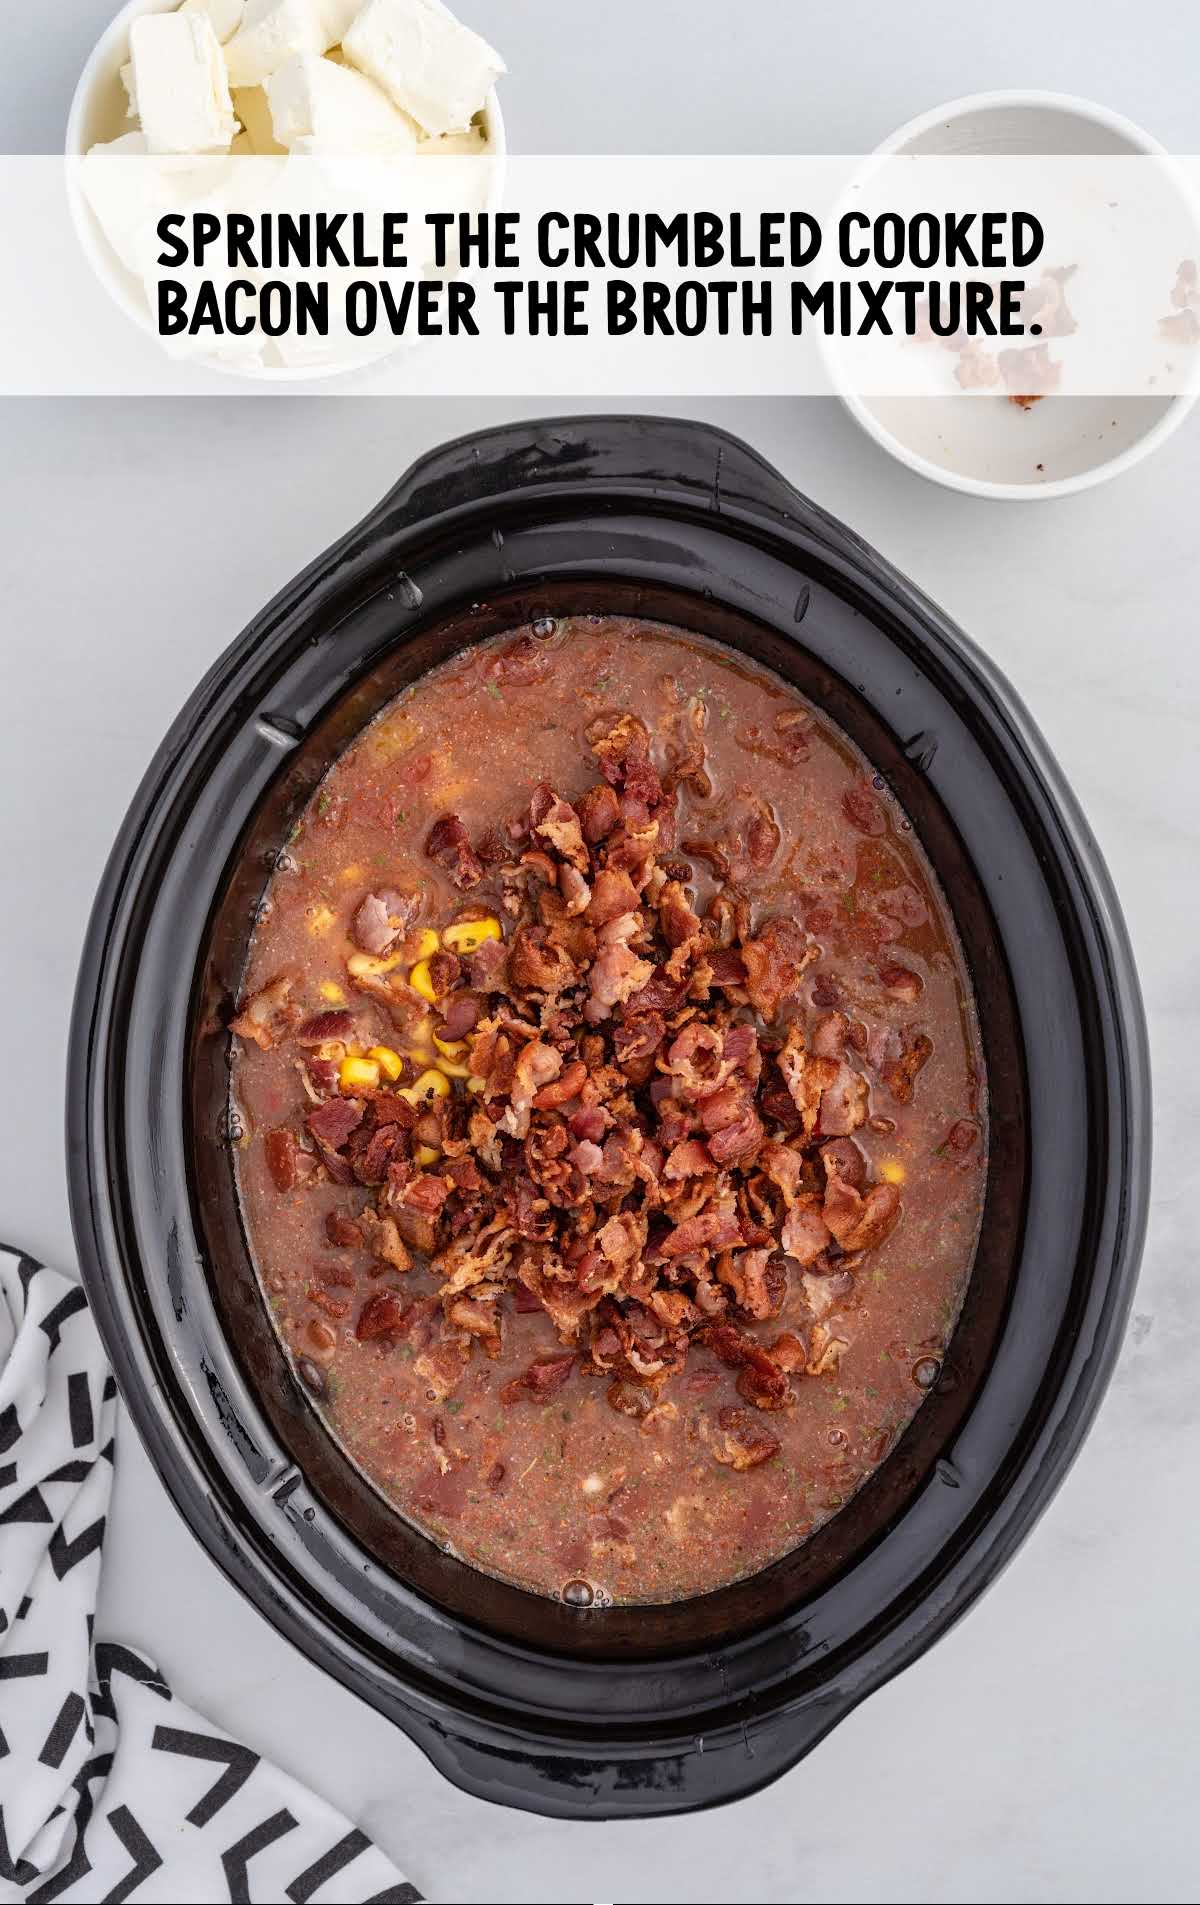 add bacon to the broth mixture in a crock pot